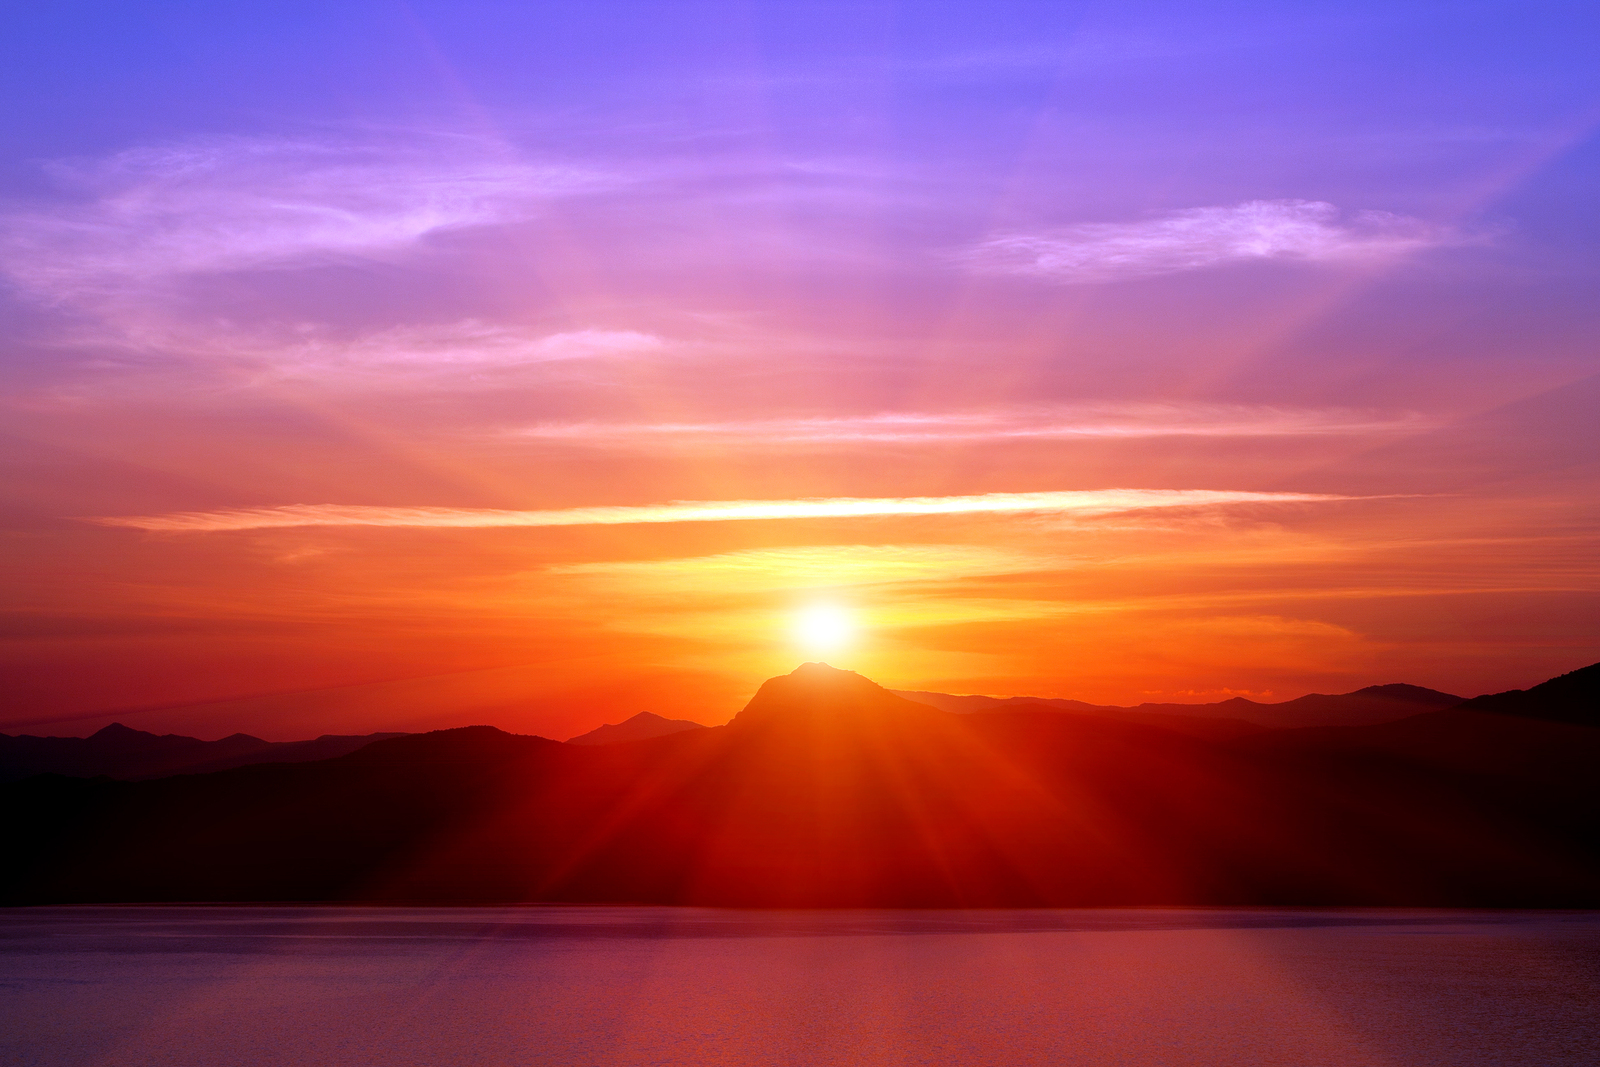 Sunset Image, Collection of Sunset Background, Sunset HQFX